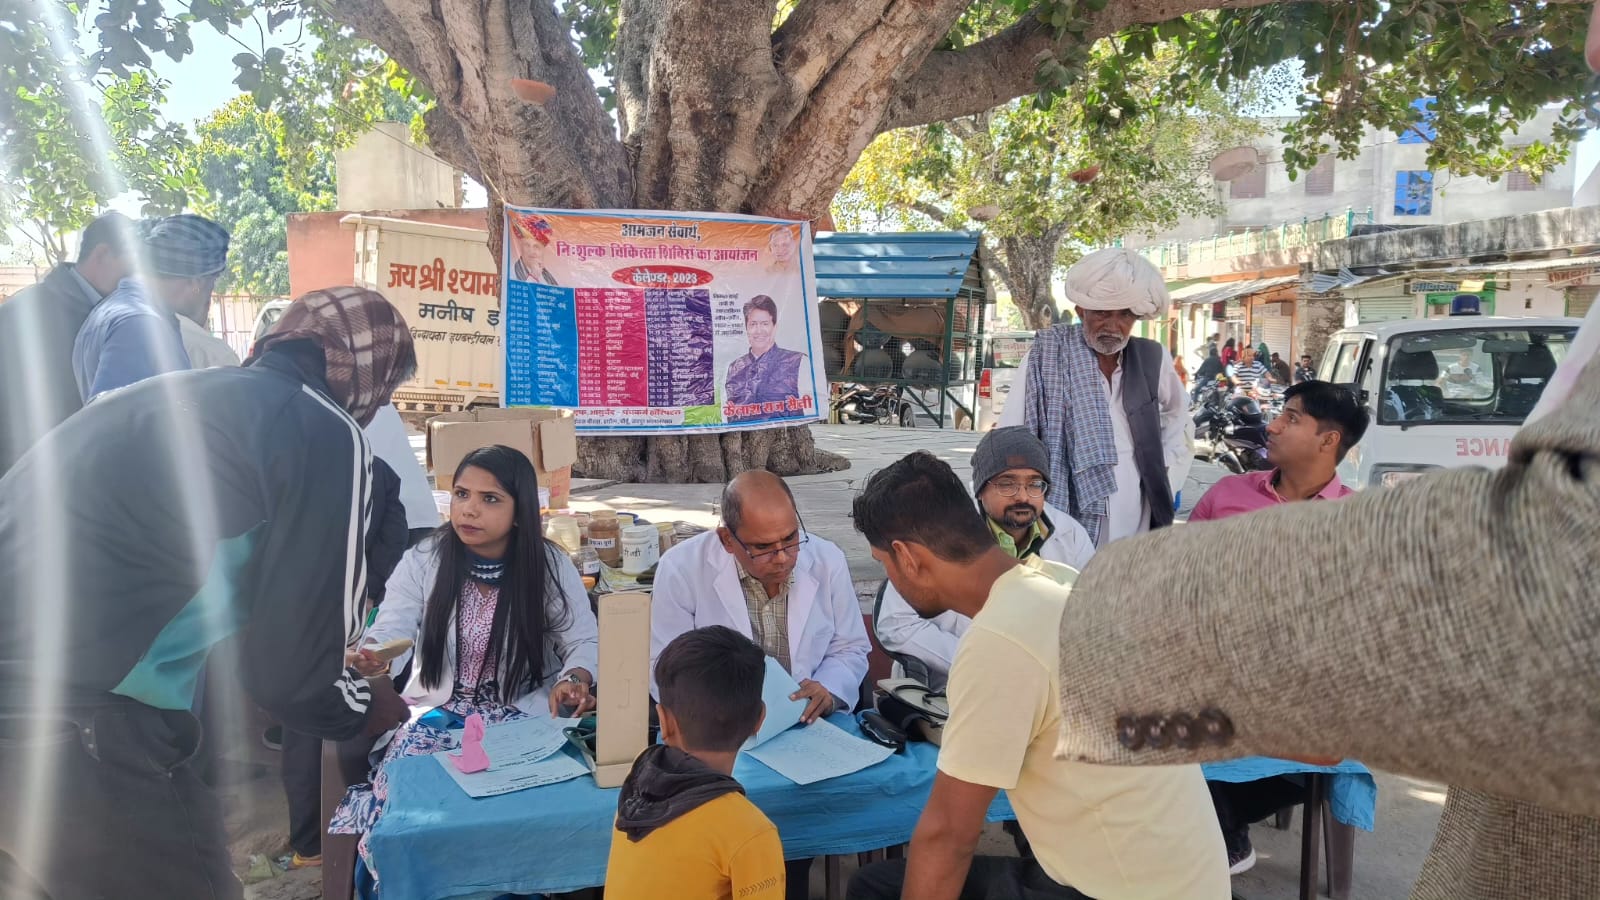 WEEKLY FREE MEDICAL CAMP ORGANIZED AT VILLAGE JAHOTA ON DATED 15 FEBRUARY 2023 AS PER SCHEDULE